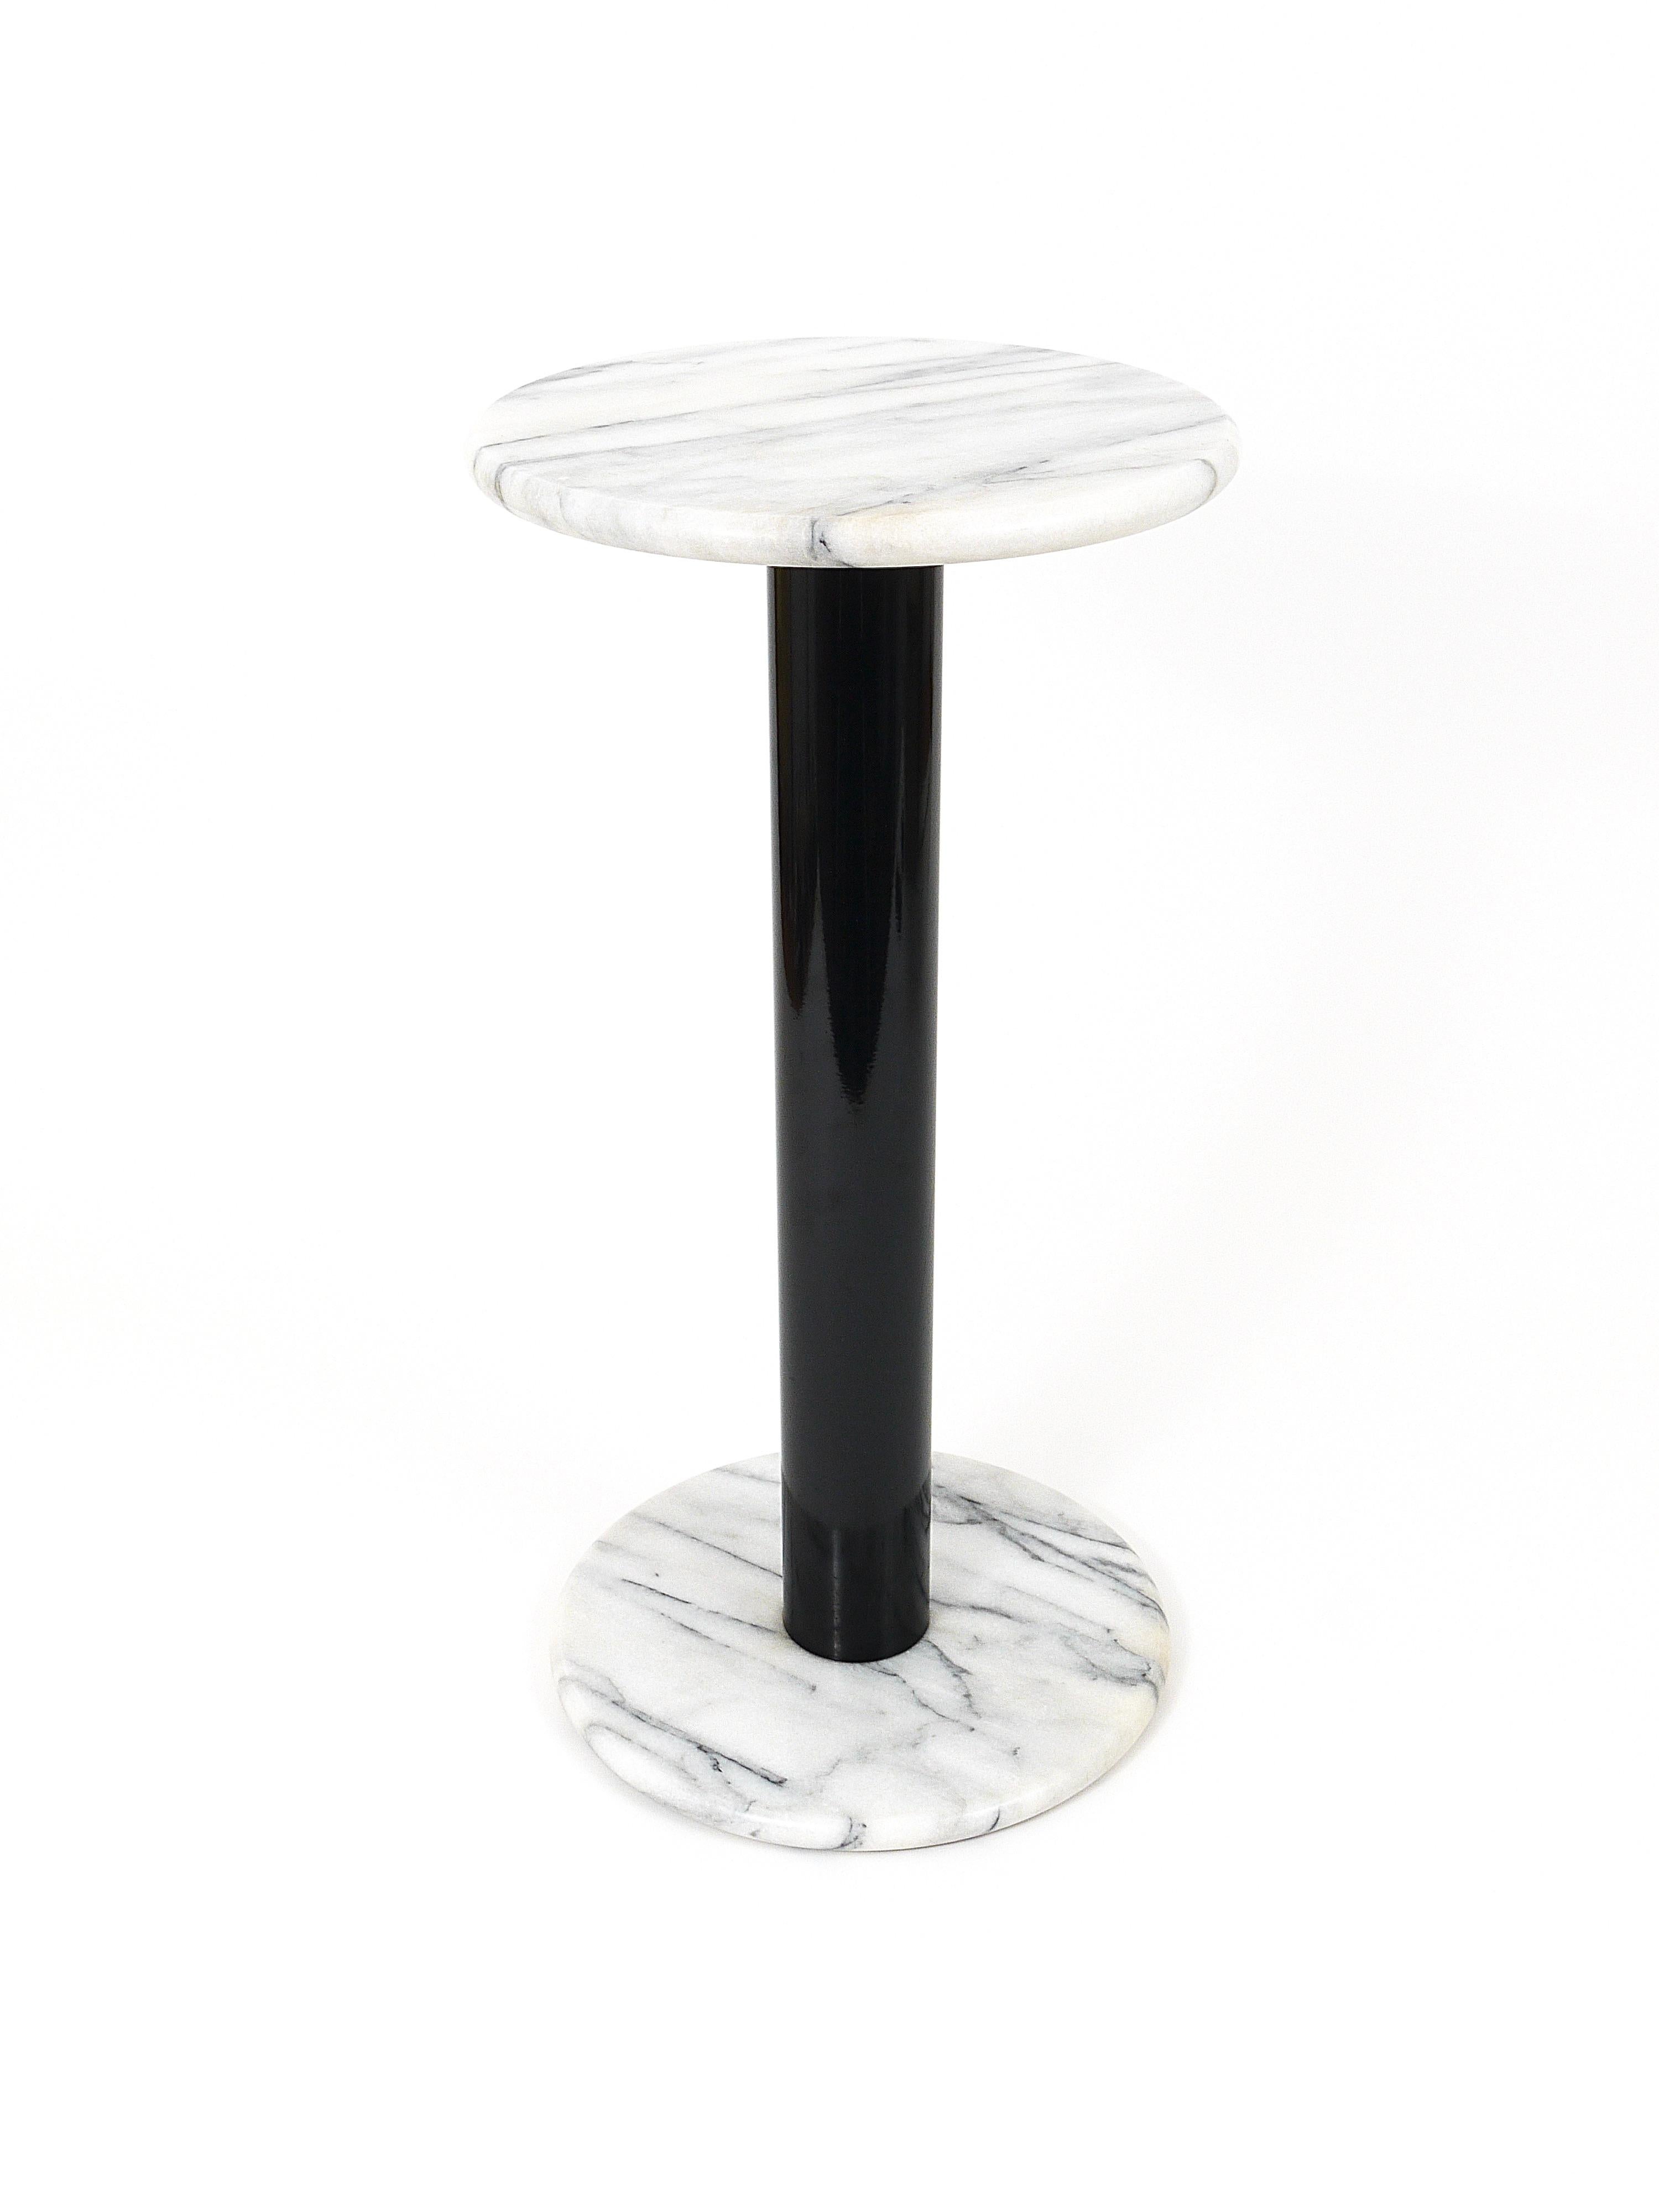 Metal Postmodern White Carrara Marble Flower Stand Pedestal Table, Italy, 1980s For Sale